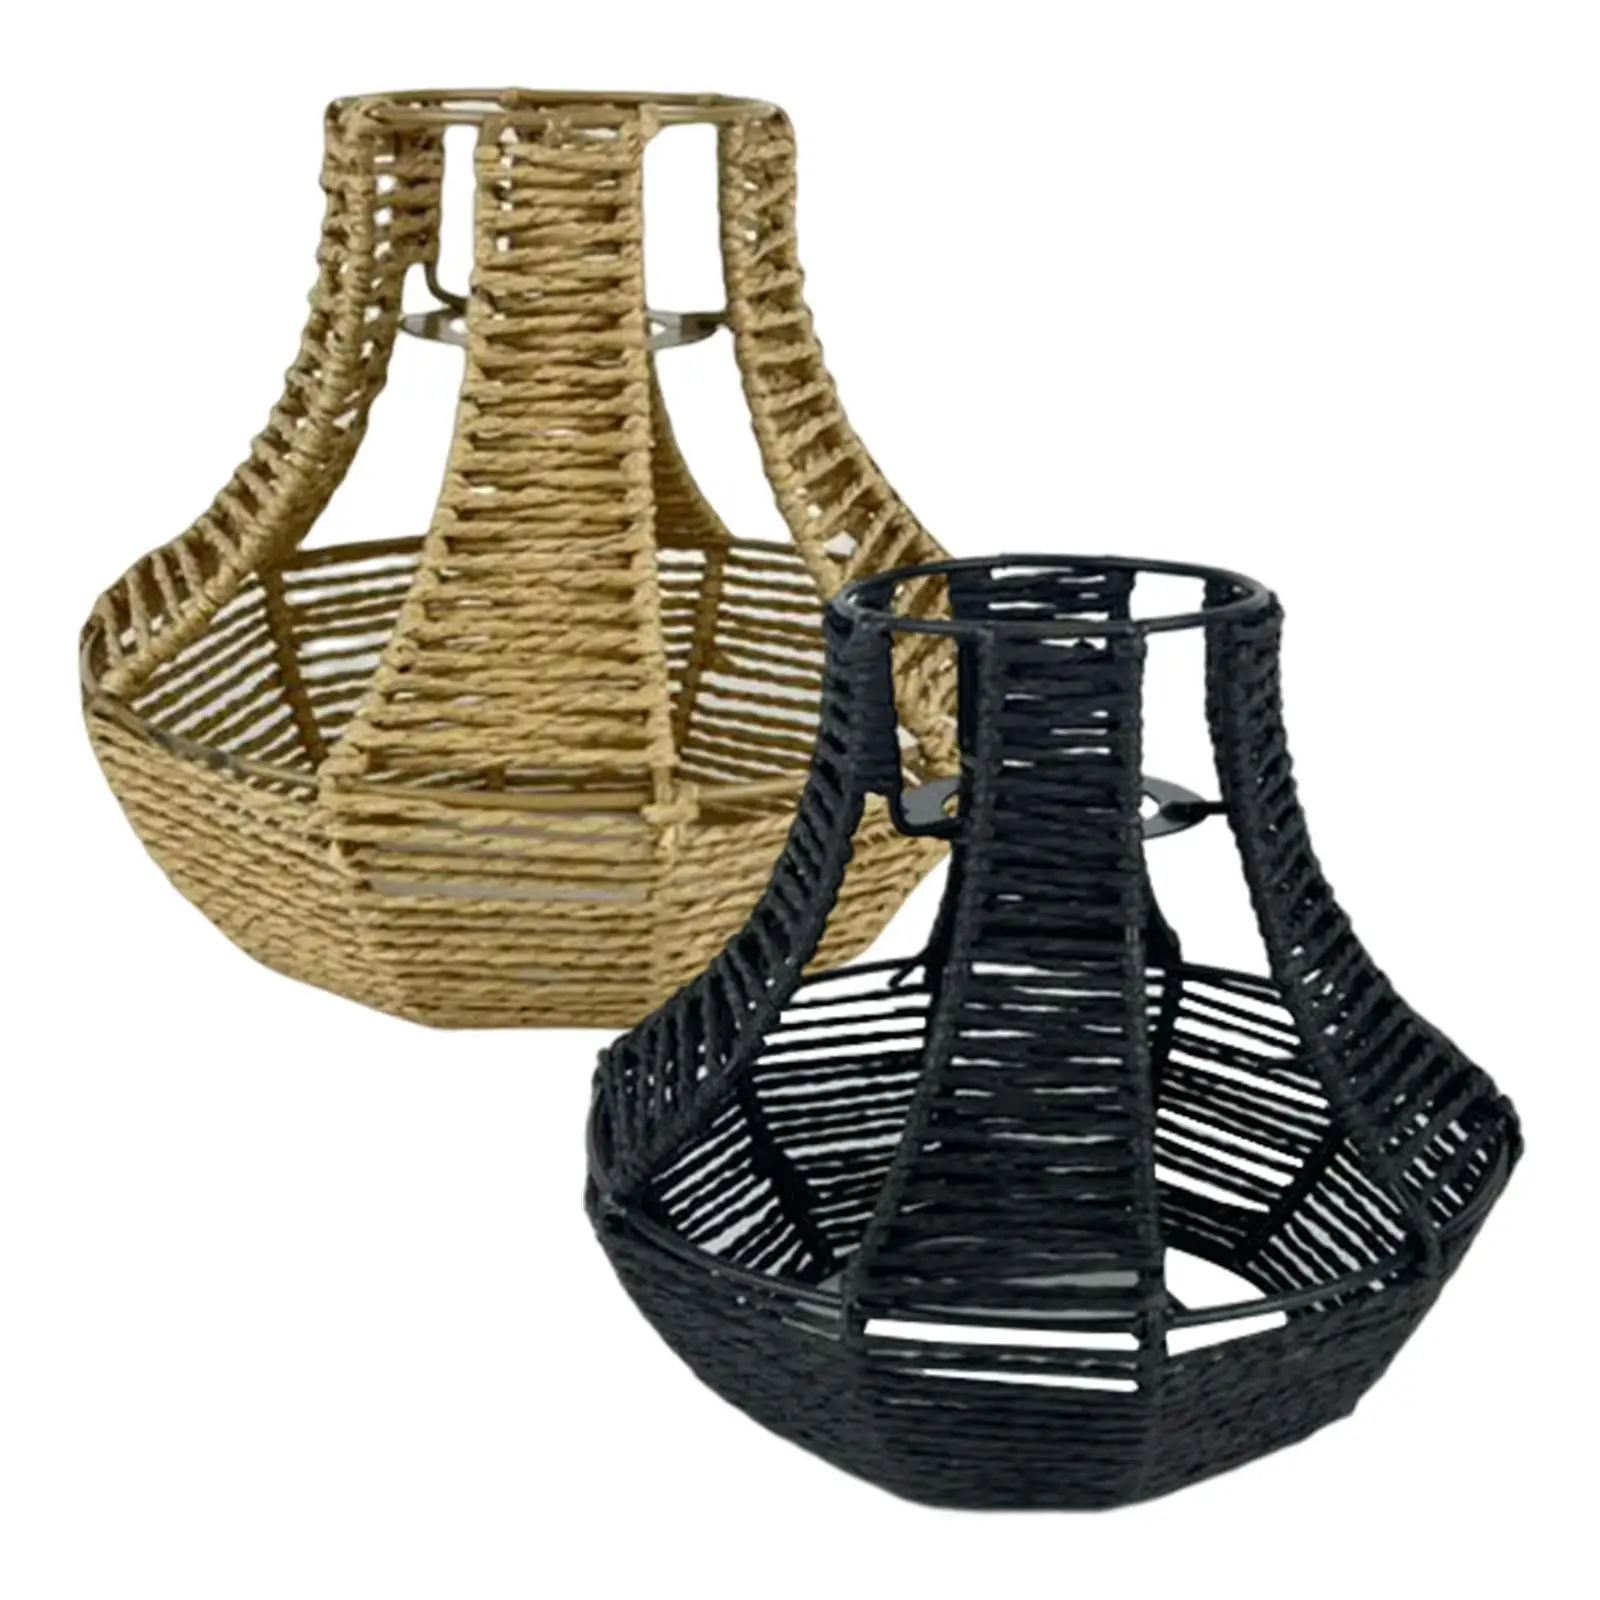 Woven Pendant Lamp Shade Paper Rope Lampshade for Balconies, Cafes, Hotels, Bars Easy Installation Pastoral Durable Elegant Look